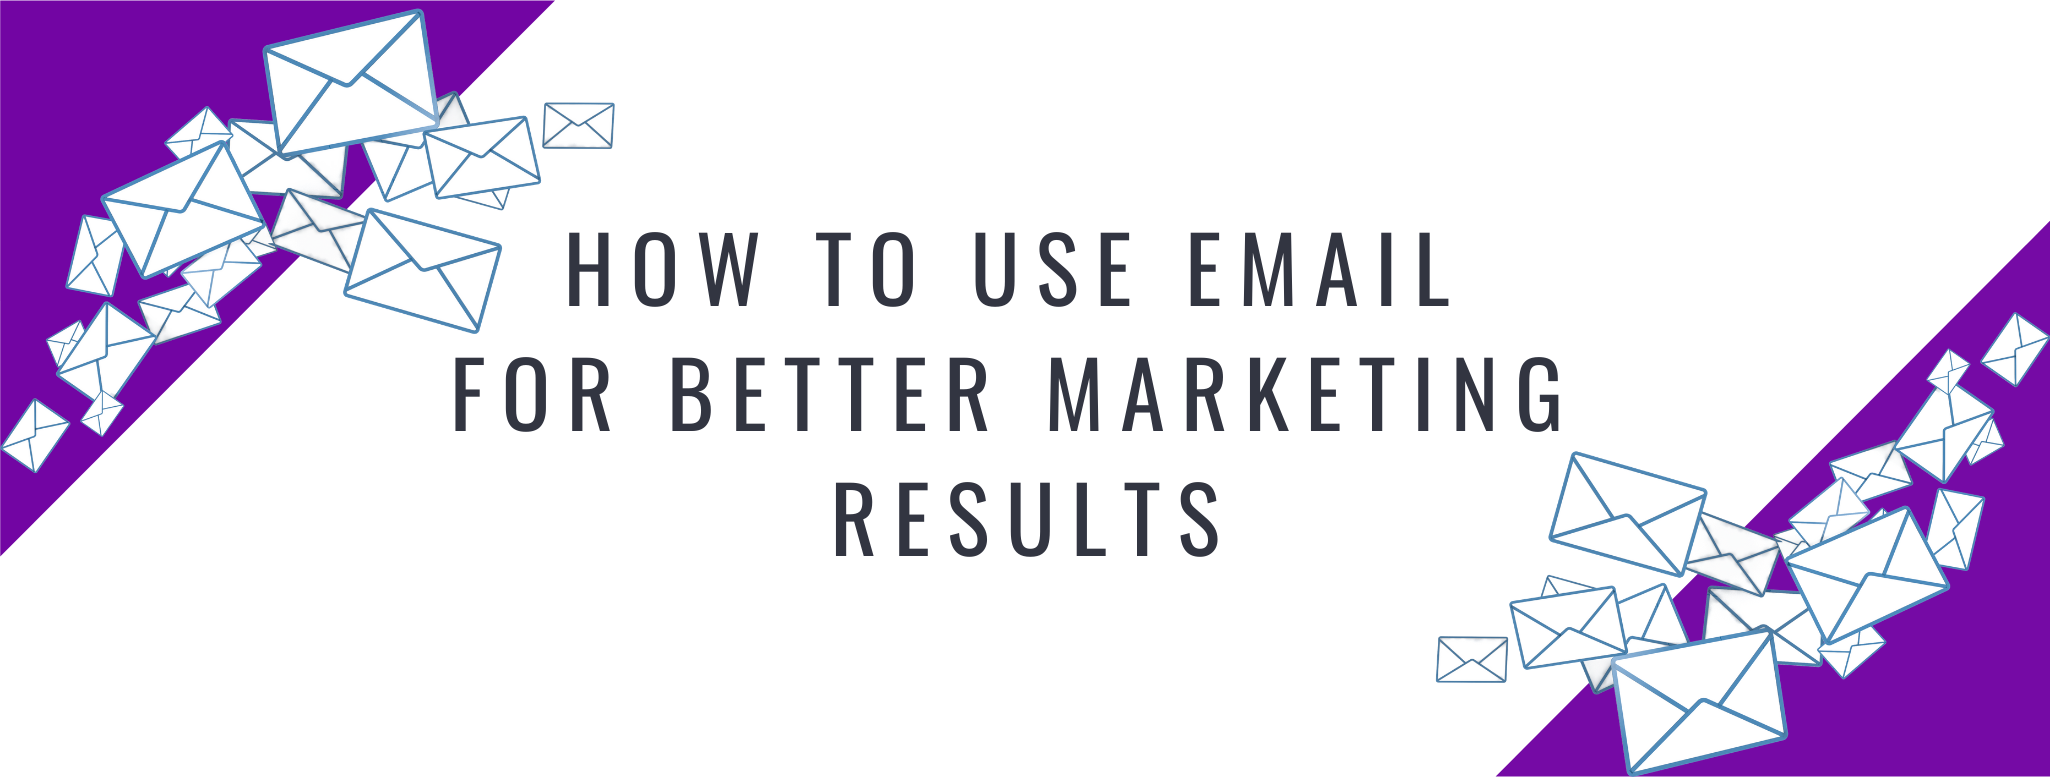 Use Email for Better Marketing Results